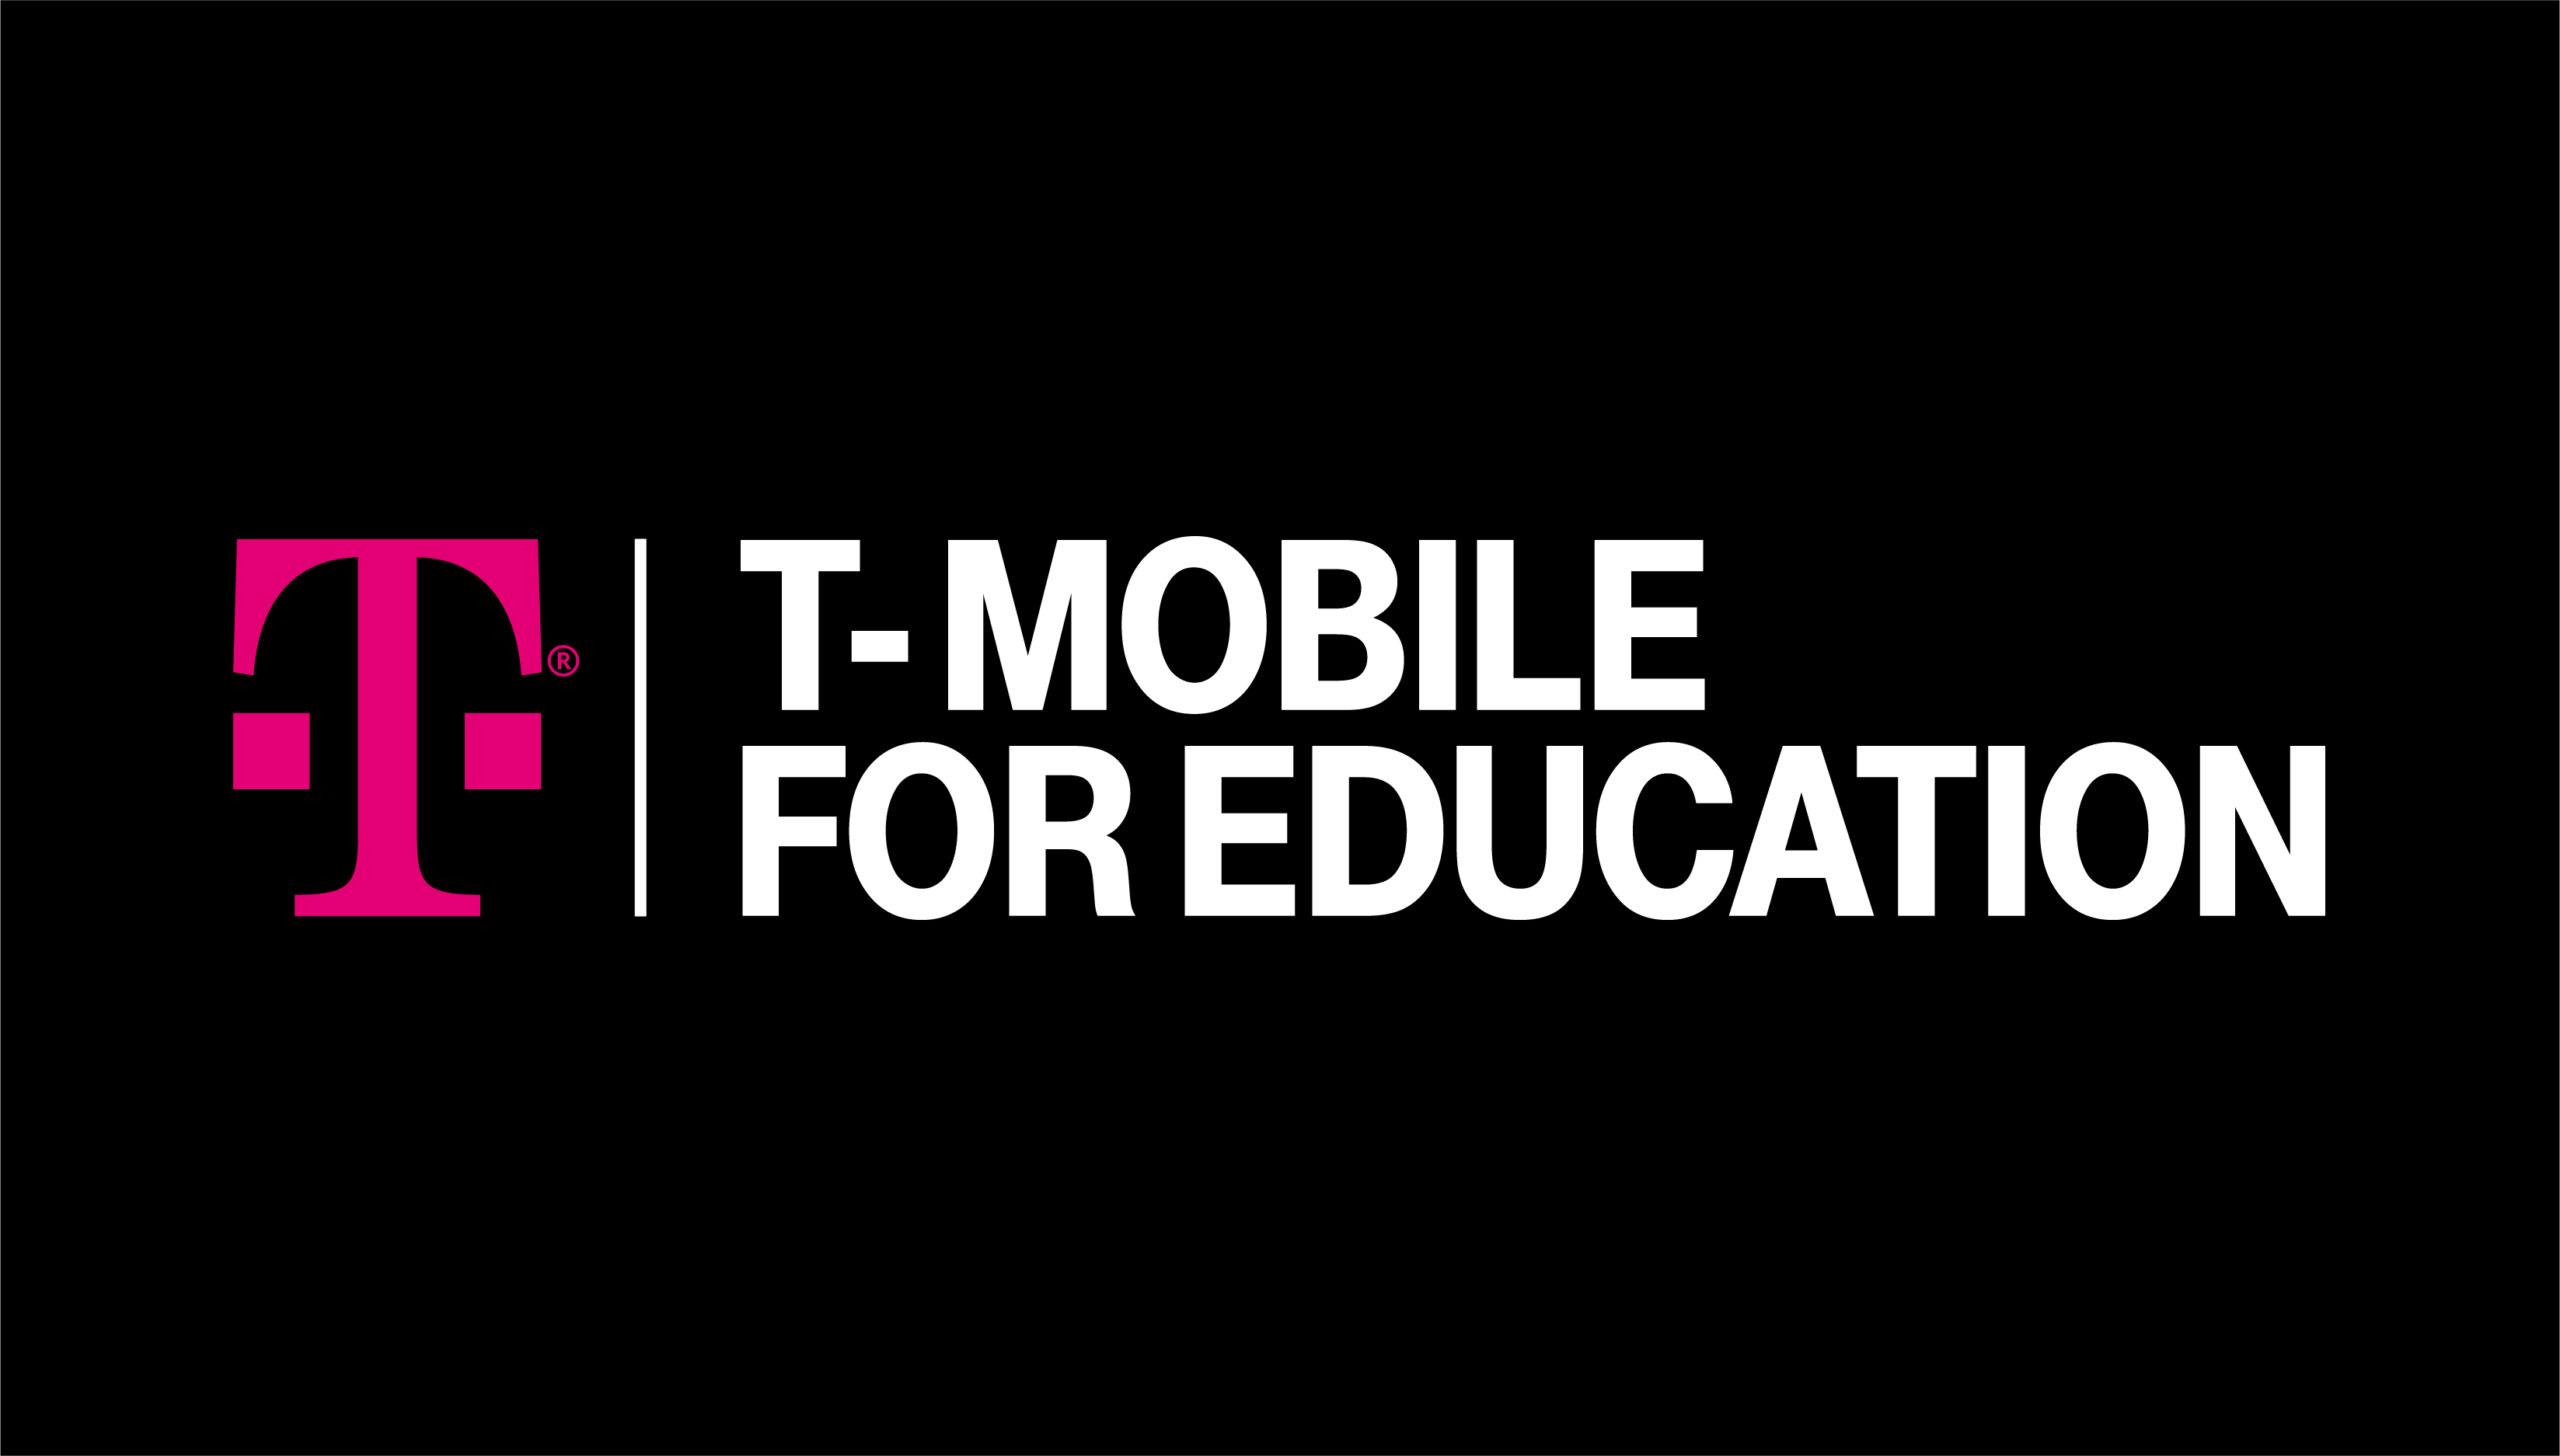 T-Mobile for Education in white lettering on a black background with logo to the left